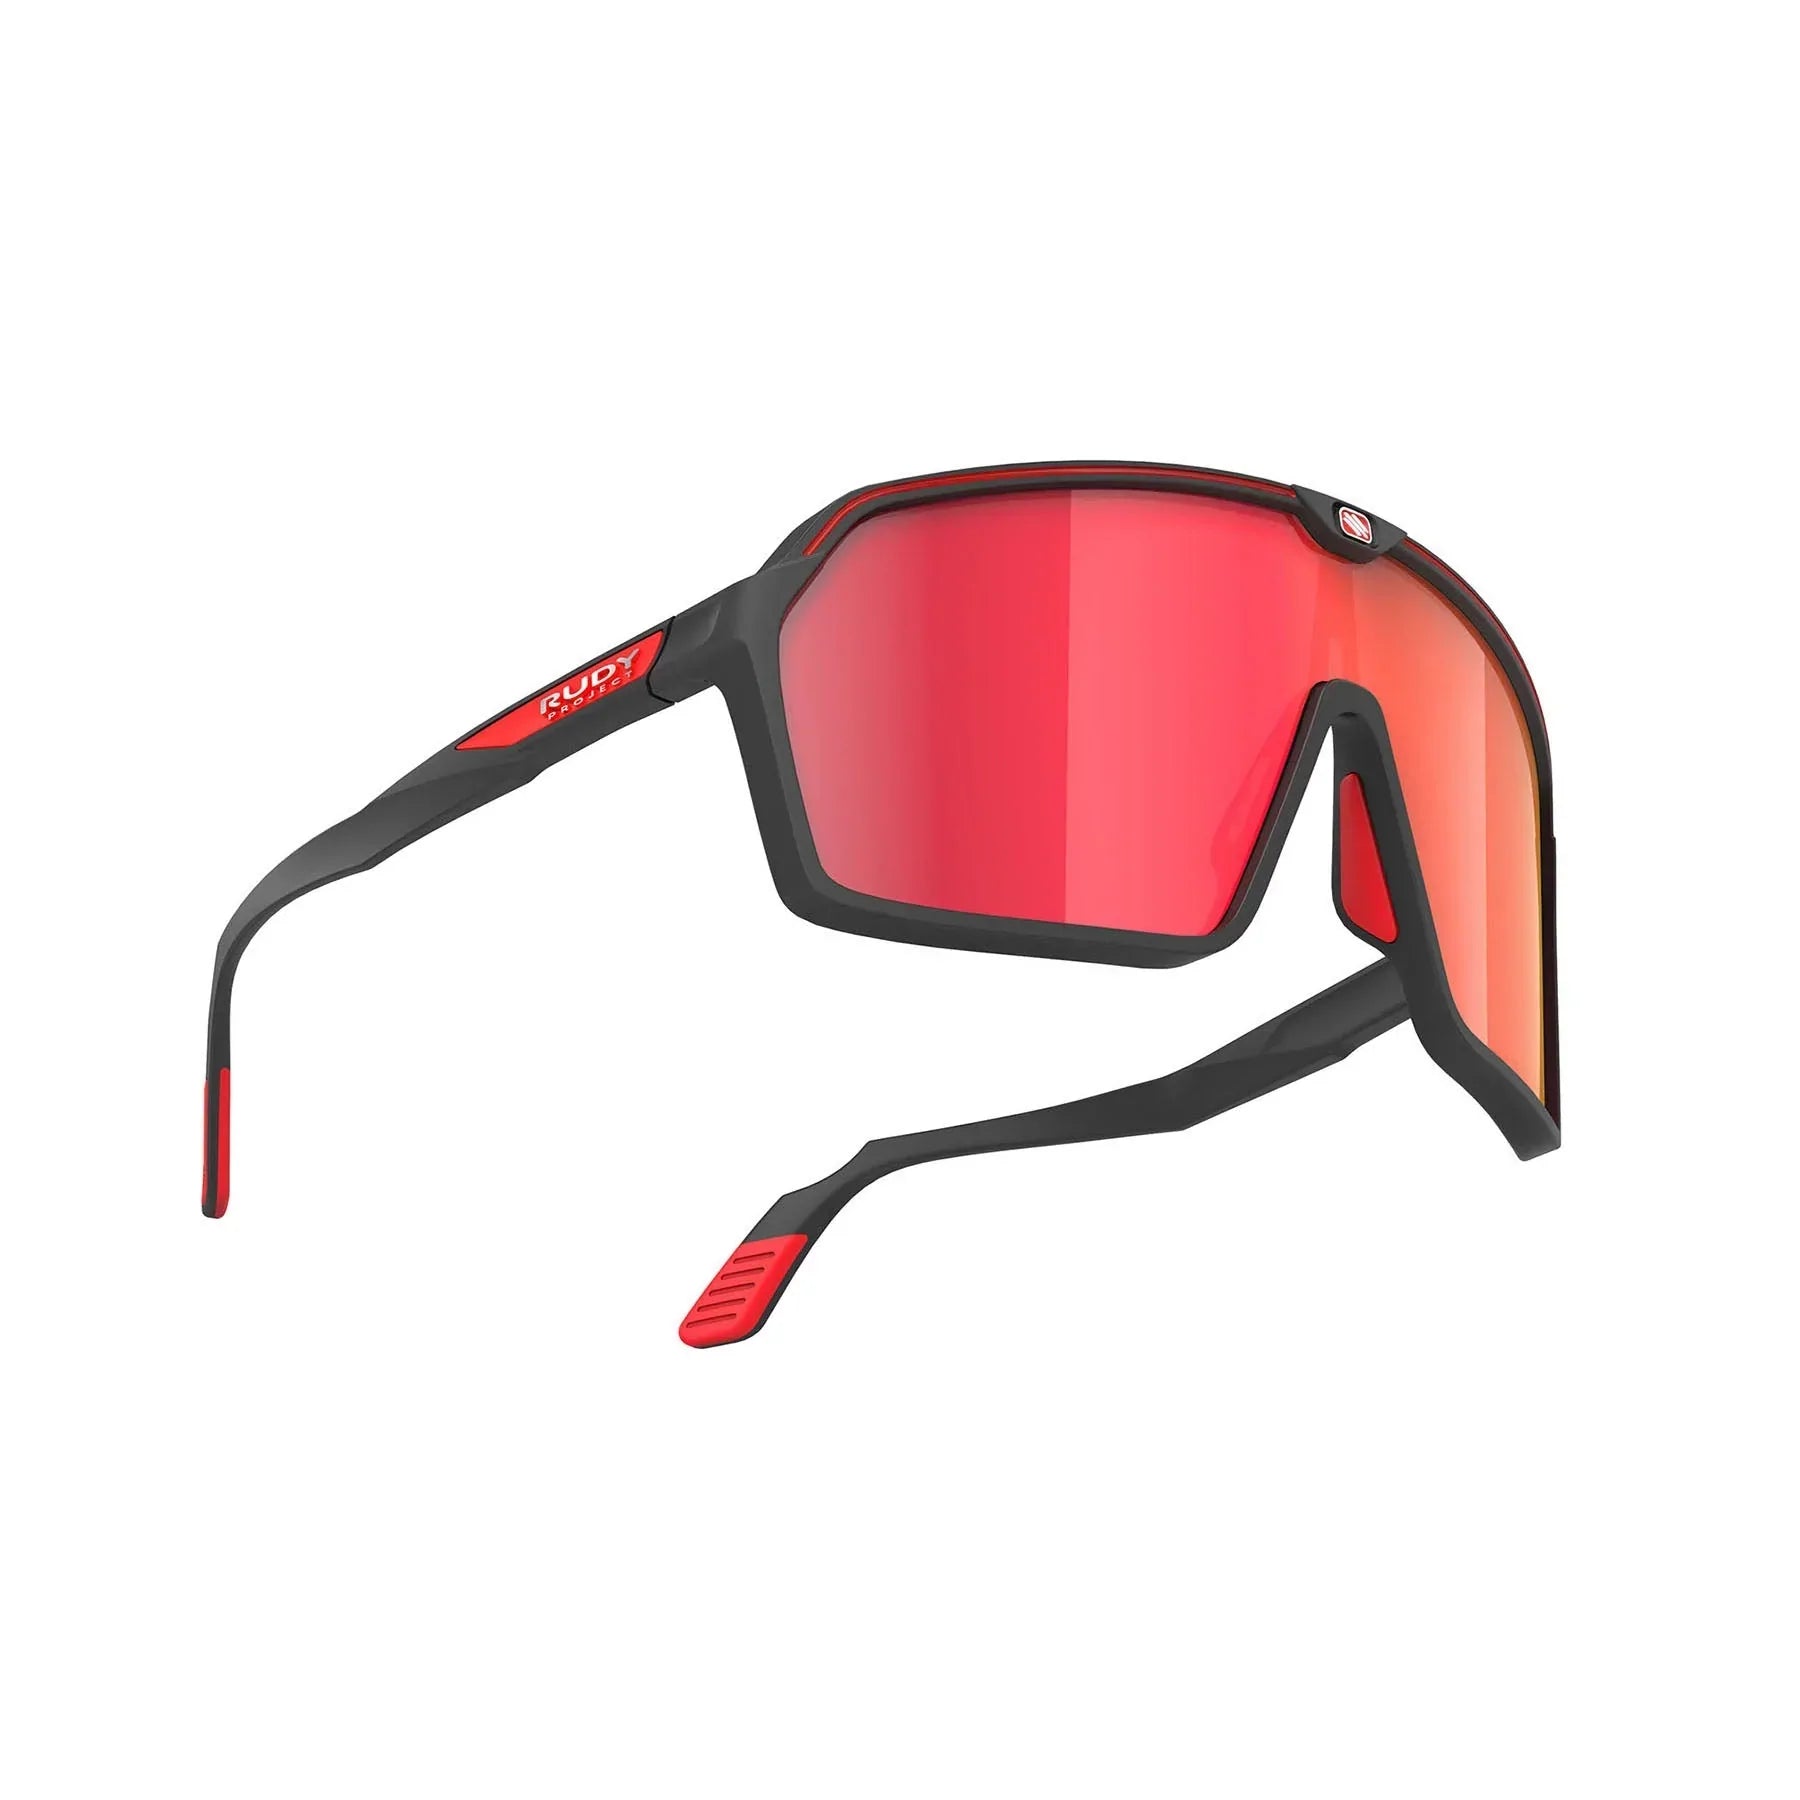 Rudy Project Spinshield running and cycling sunglasses#color_spinshield-black-matte-with-multilaser-red-lenses